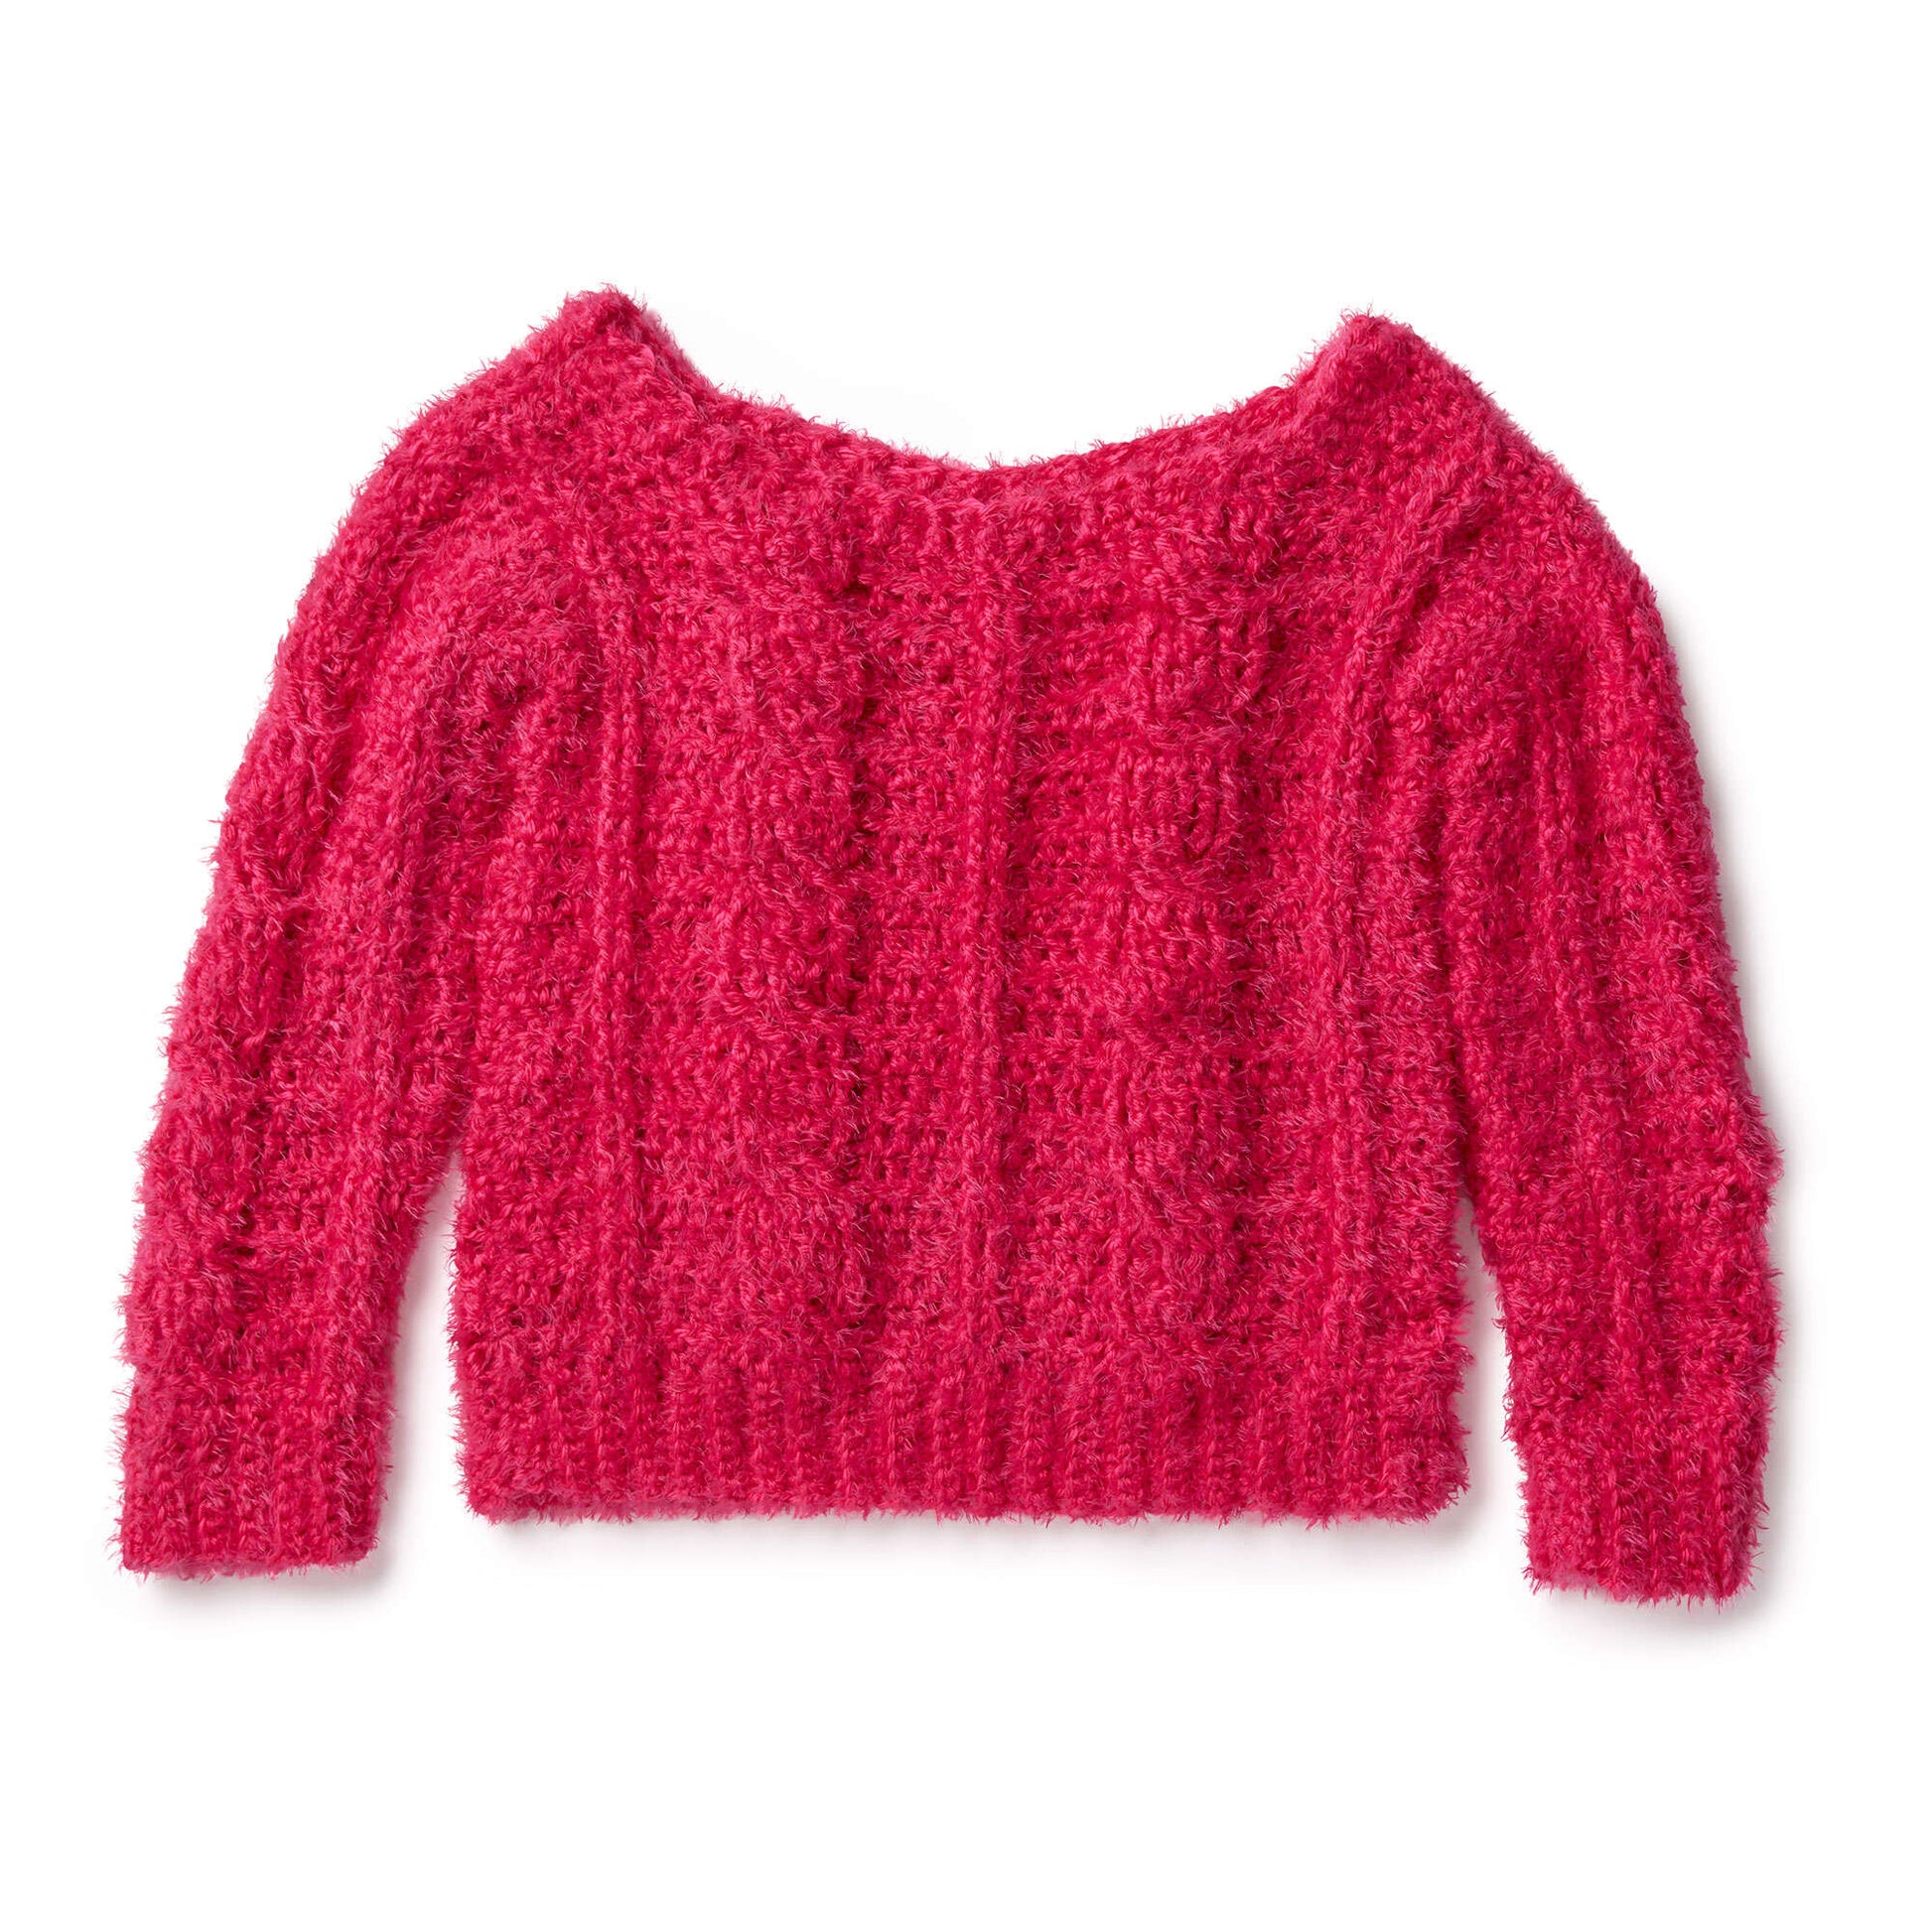 Free Red Heart Sweater Weather Cabled Crochet Pullover Pattern